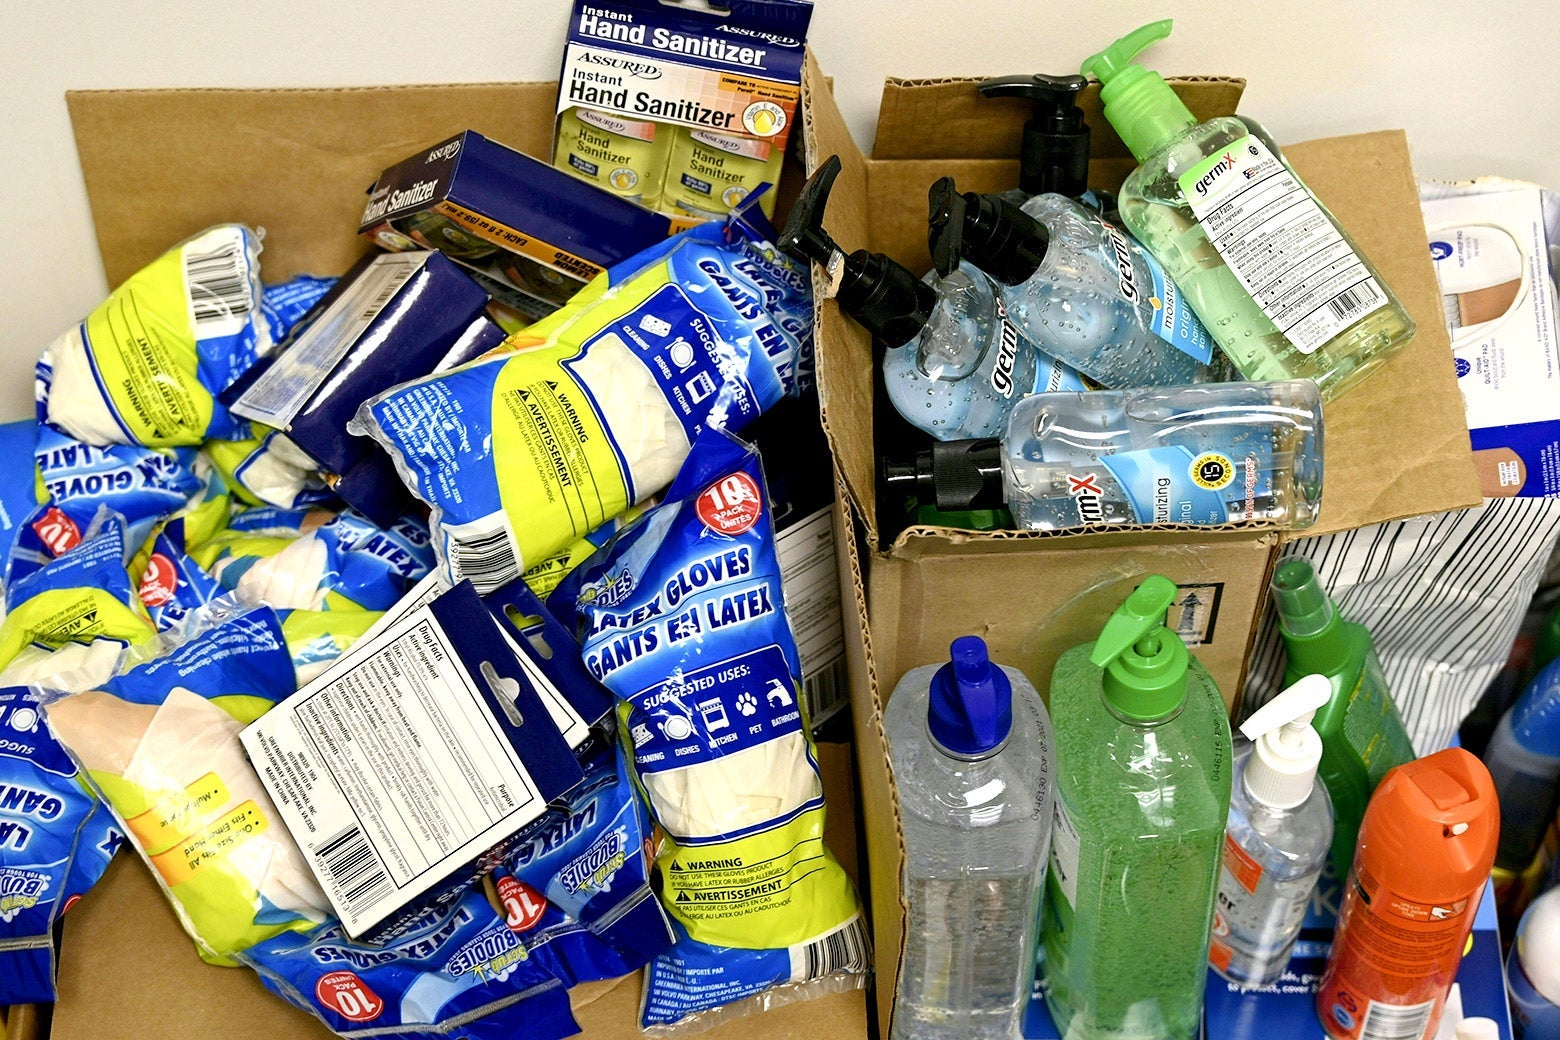 An assortment of cleaning supplies bursting from cardboard boxes.